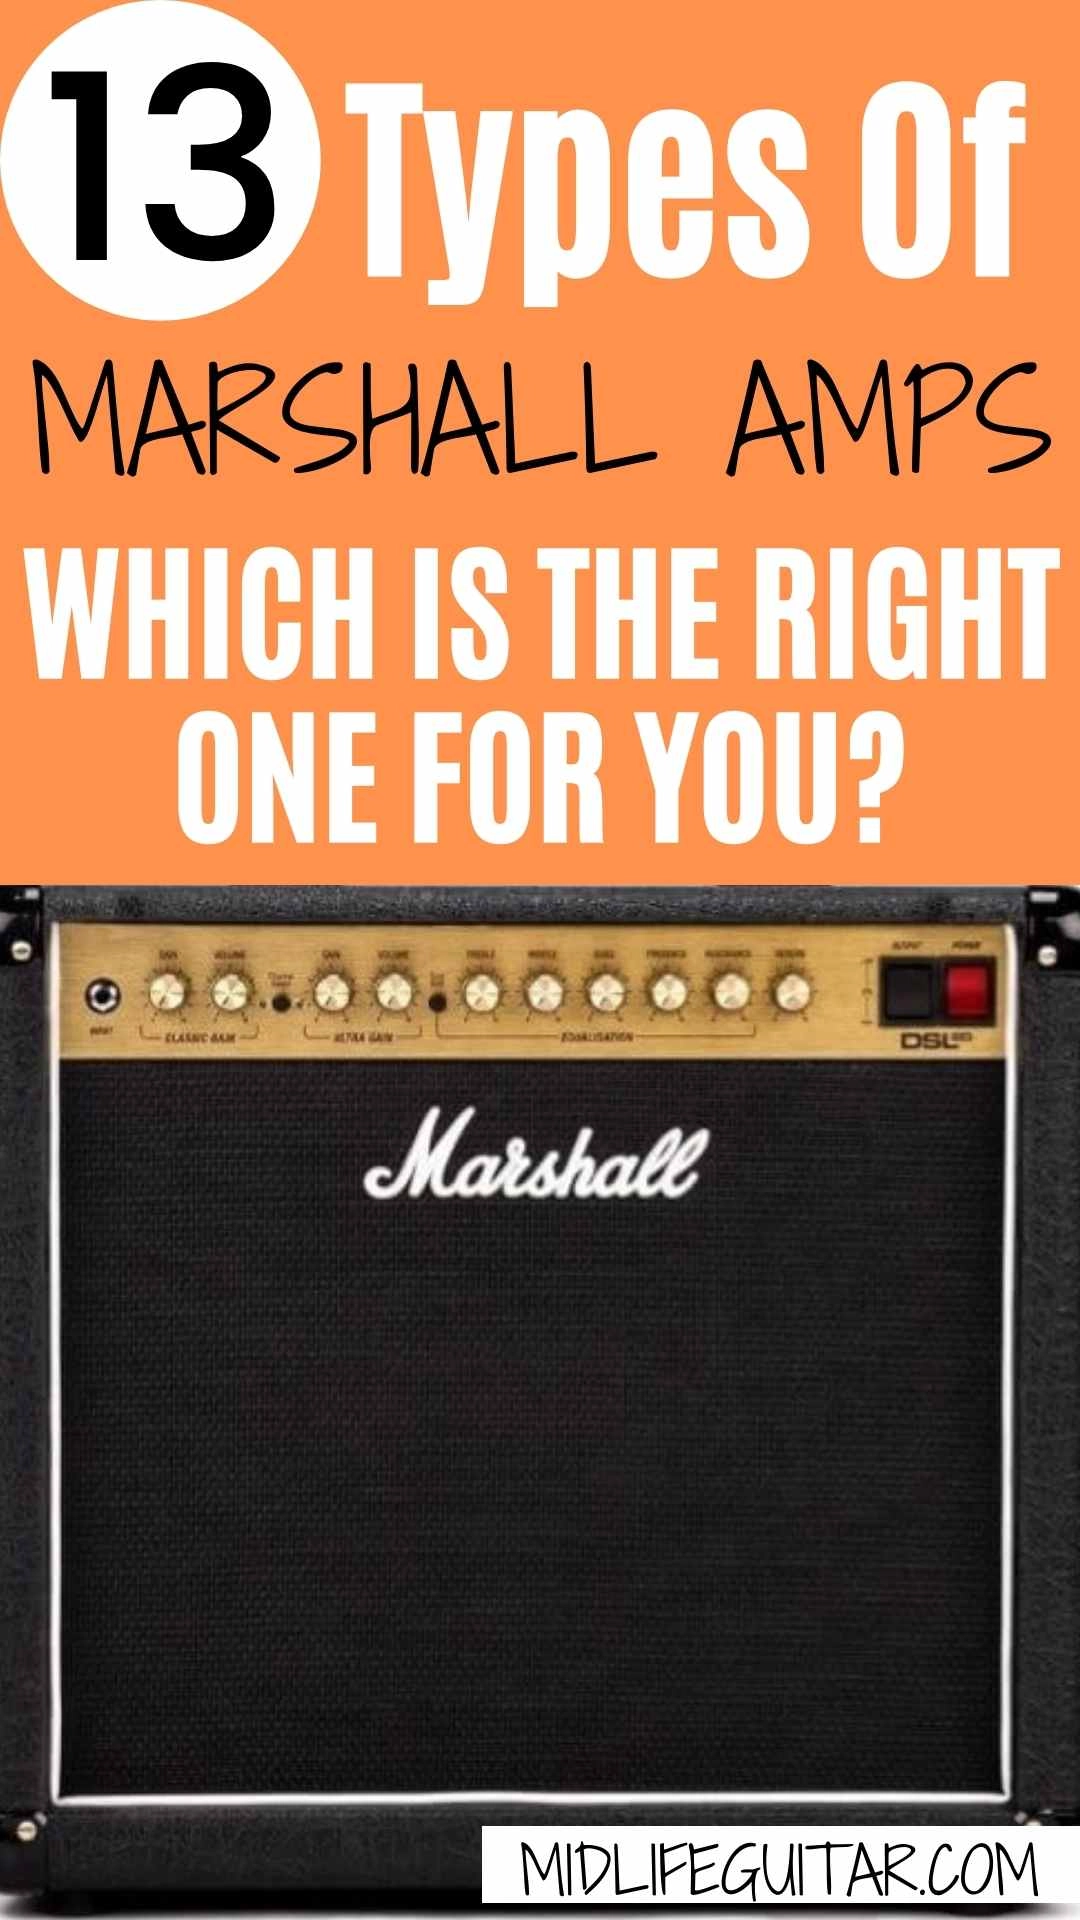 Marshall DSL20CR Guitar Combo Amplifier (20 Watts, 1x12") with the words "13 types of Marshall amps which is the right one for you?"